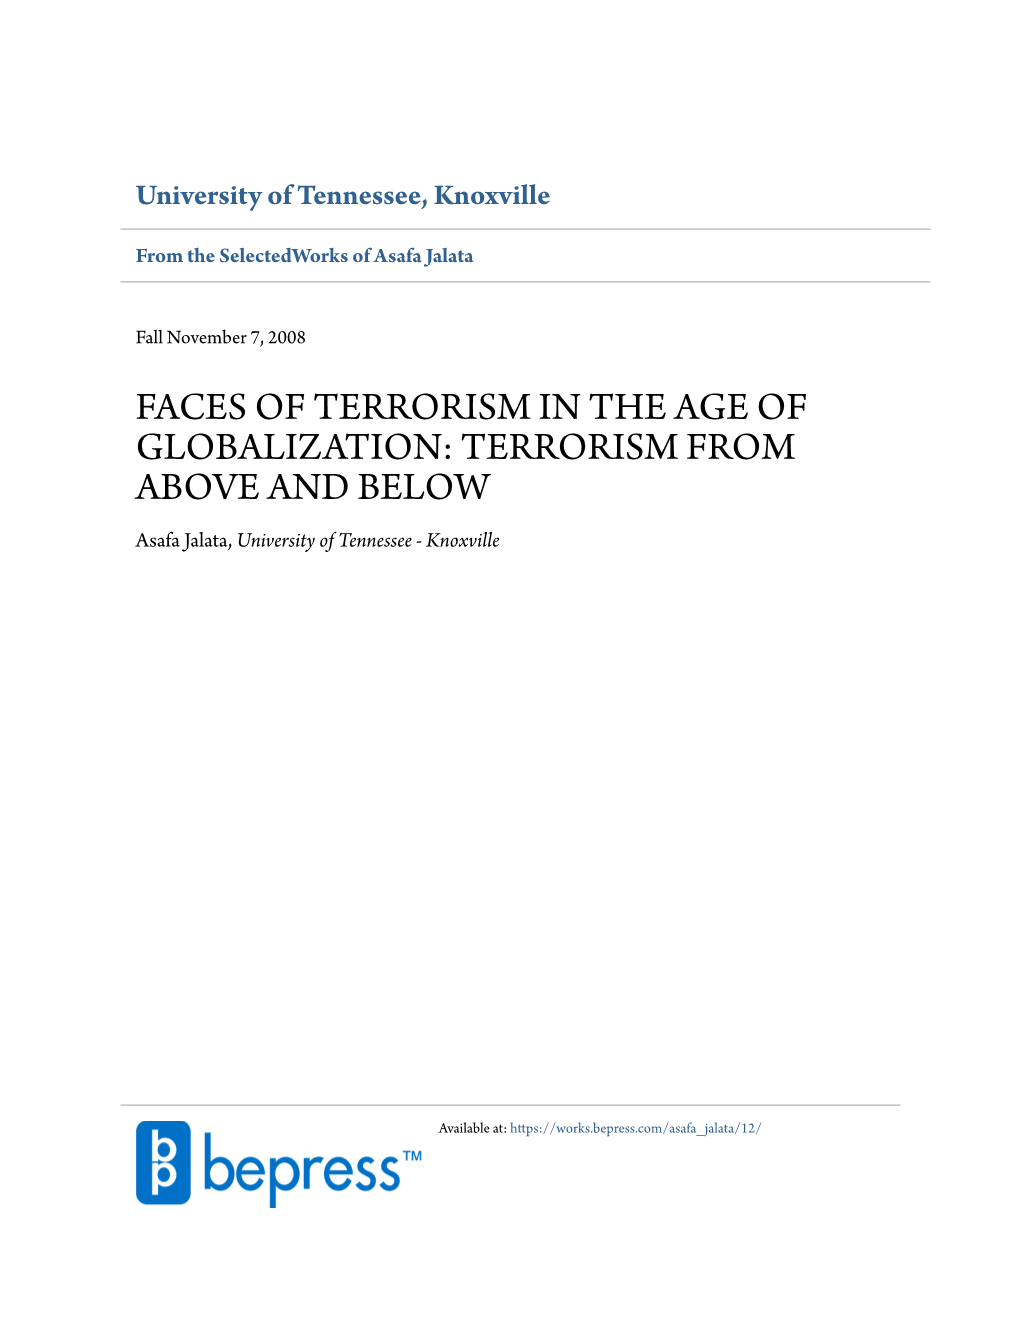 FACES of TERRORISM in the AGE of GLOBALIZATION: TERRORISM from ABOVE and BELOW Asafa Jalata, University of Tennessee - Knoxville